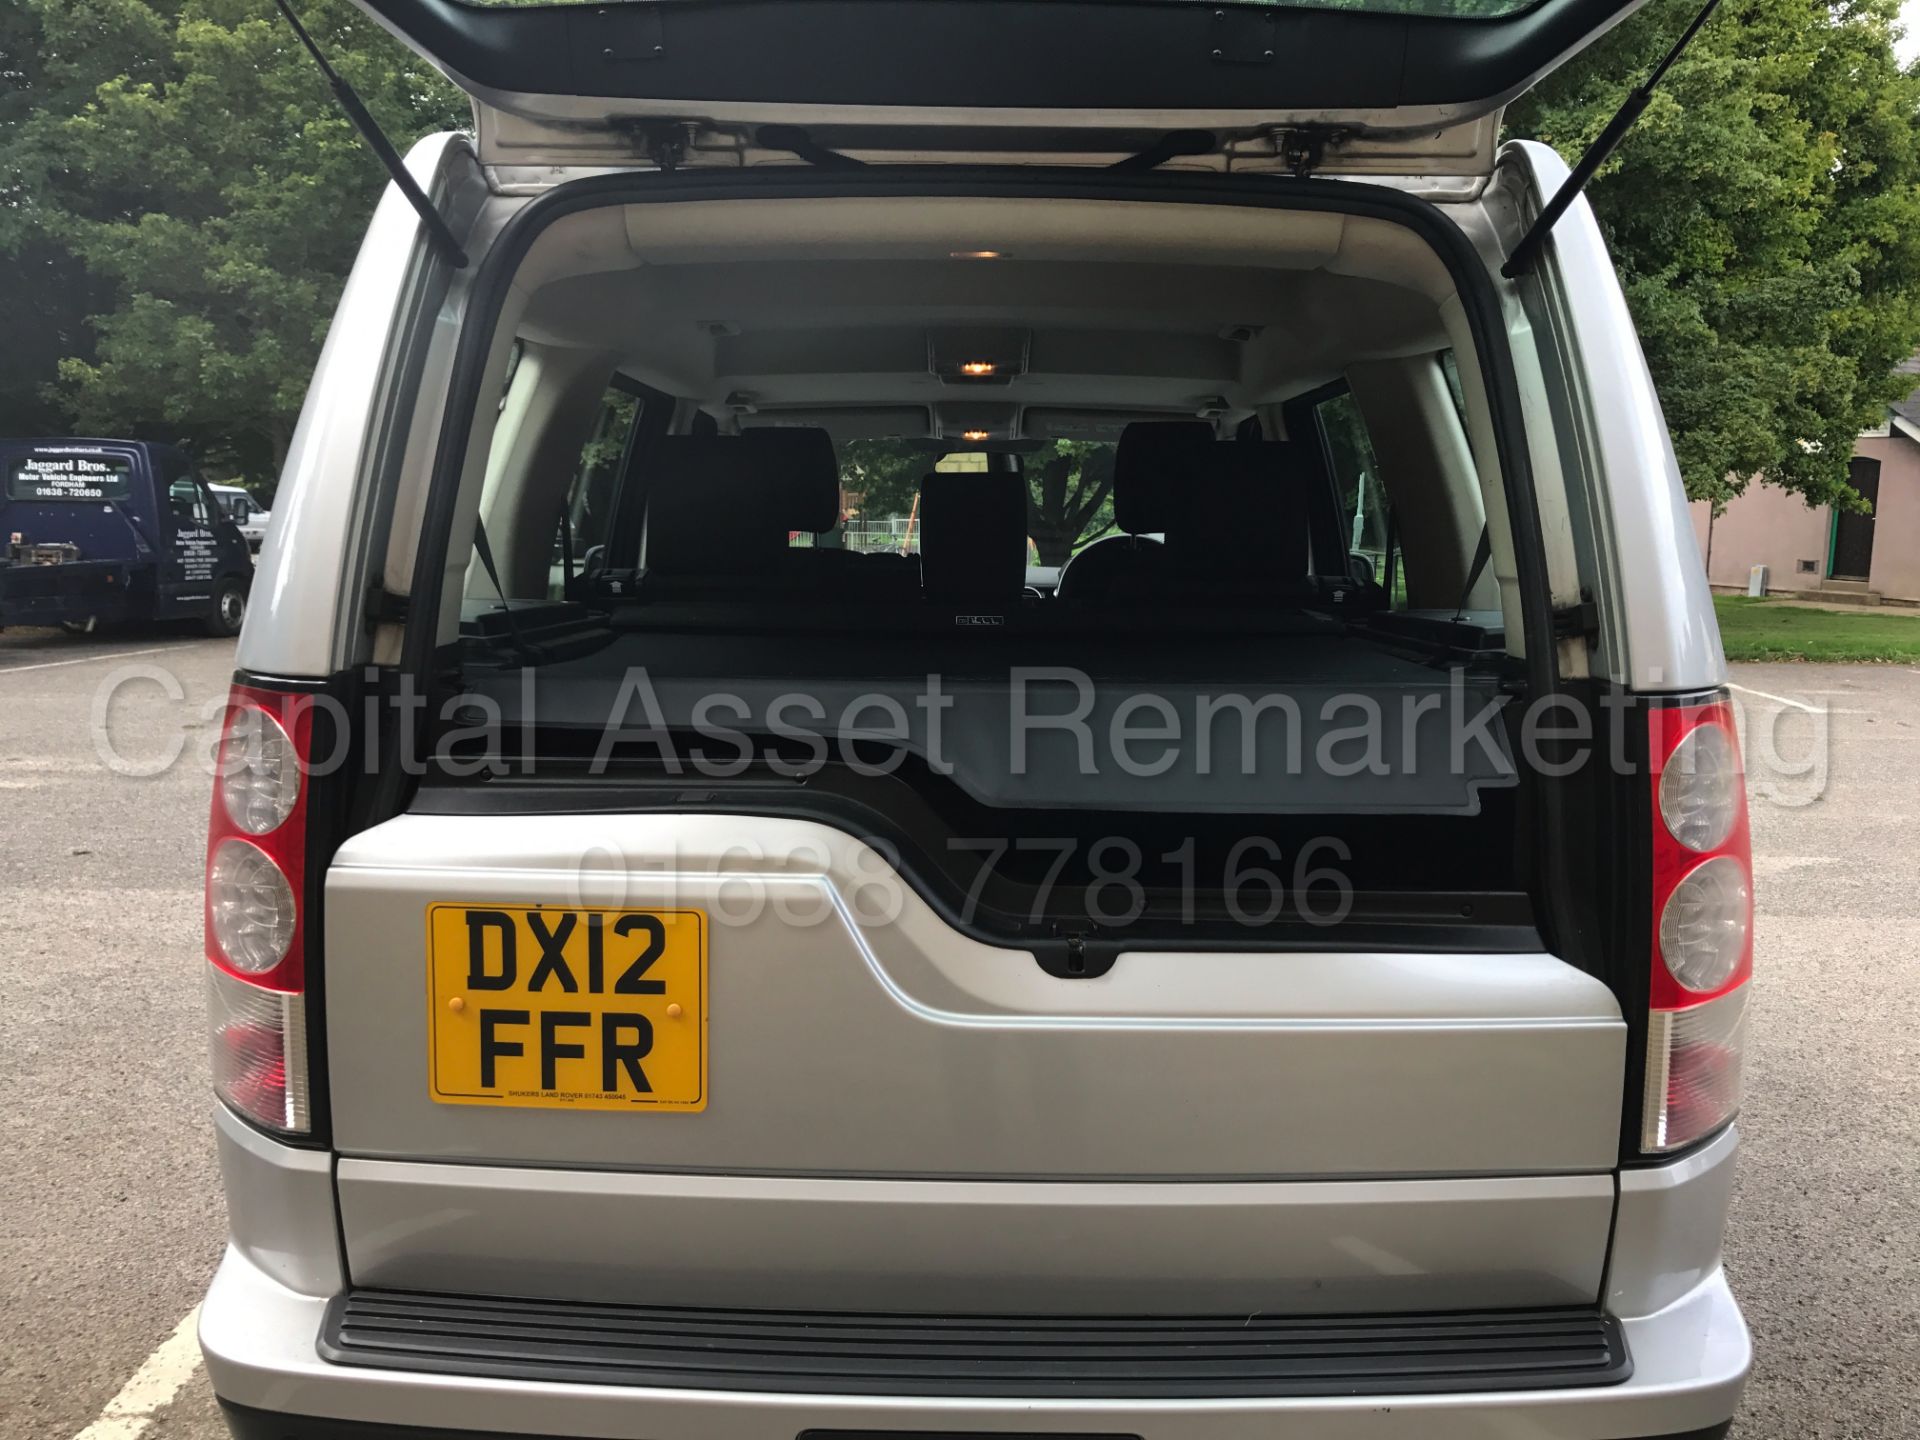 (On Sale) LAND ROVER DISCOVERY 4 (2012) '3.0 SDV6 - 8 SPEED AUTO - 7 SEATER' **HUGE SPEC** (1 OWNER) - Image 18 of 33